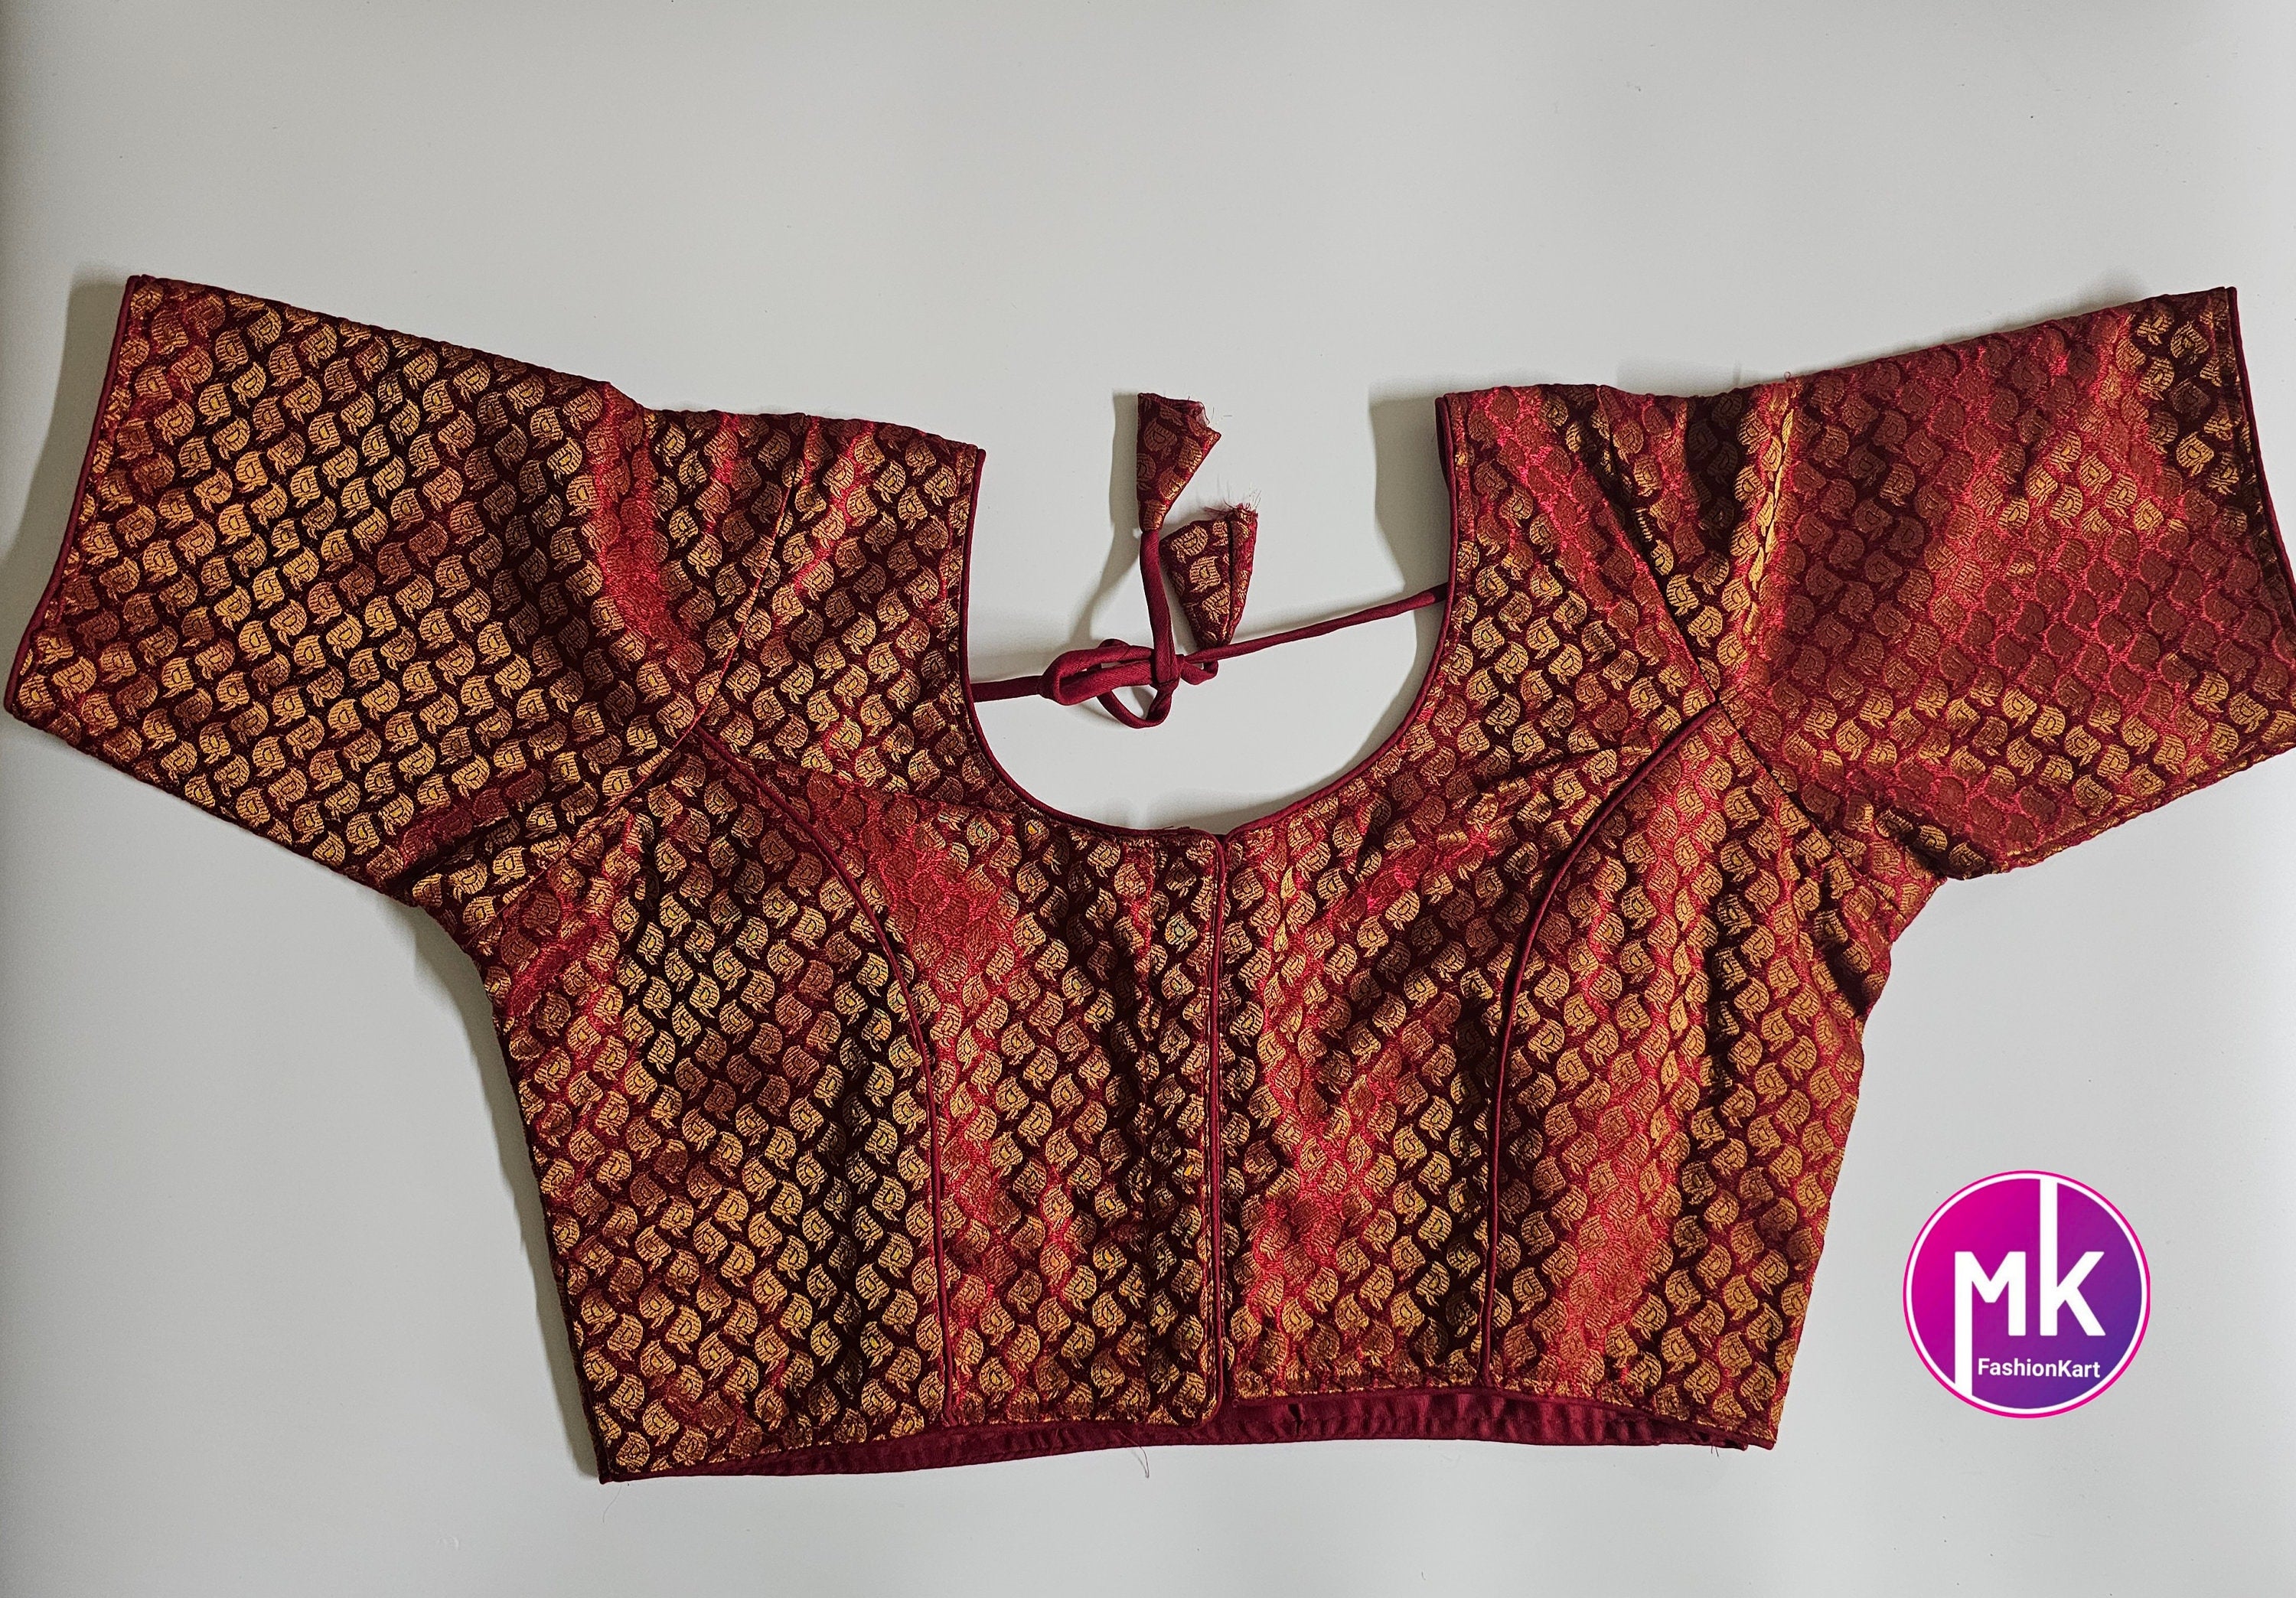 Readymade Saree Blouse - Maroon Color with golden design Blouse - Princess cut Blouse - Size 40" (Upto 42")